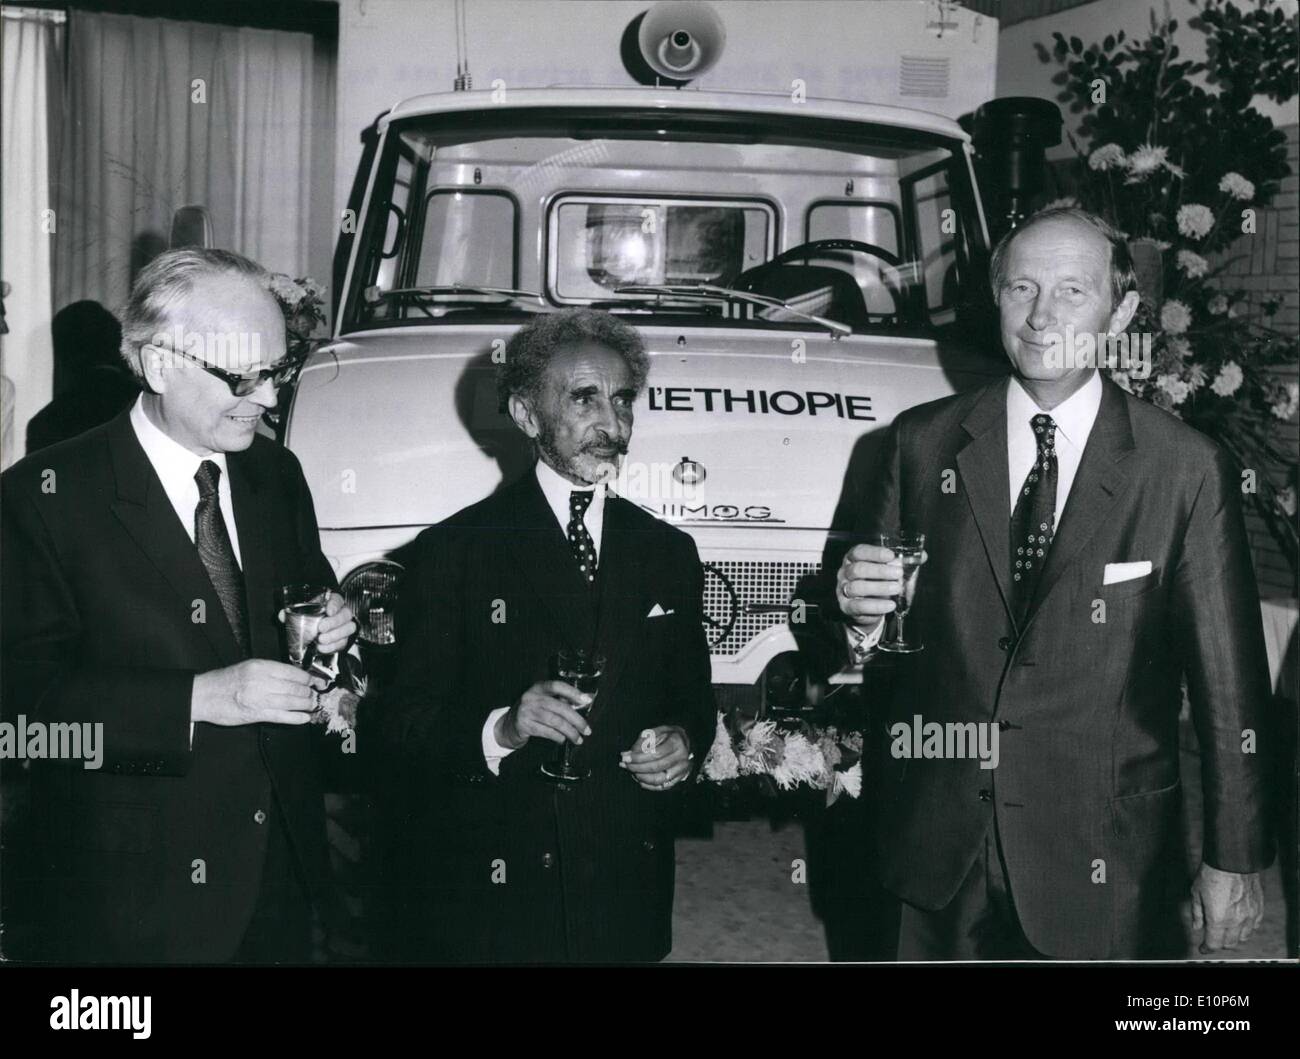 Sep. 09, 1973 - The emperor of Ethiopia on private visit to Federal Republic of Germany: On this private visit emperor Haile Selassie came to Stuttgart on Sept. 11, 1973. He also visited the near by Daimler-Benz factory in Unterturkheim, where he received a Daimler-Benz-Unimog (small truck) as a present. Our photo was taken at this occasion. Ops.: Emperor Haile Selassie (centre) with the President of Baden-Wurttemberg, Dr. Hans Filbinger (r) and chief executive Dr. Zahn. Stock Photo